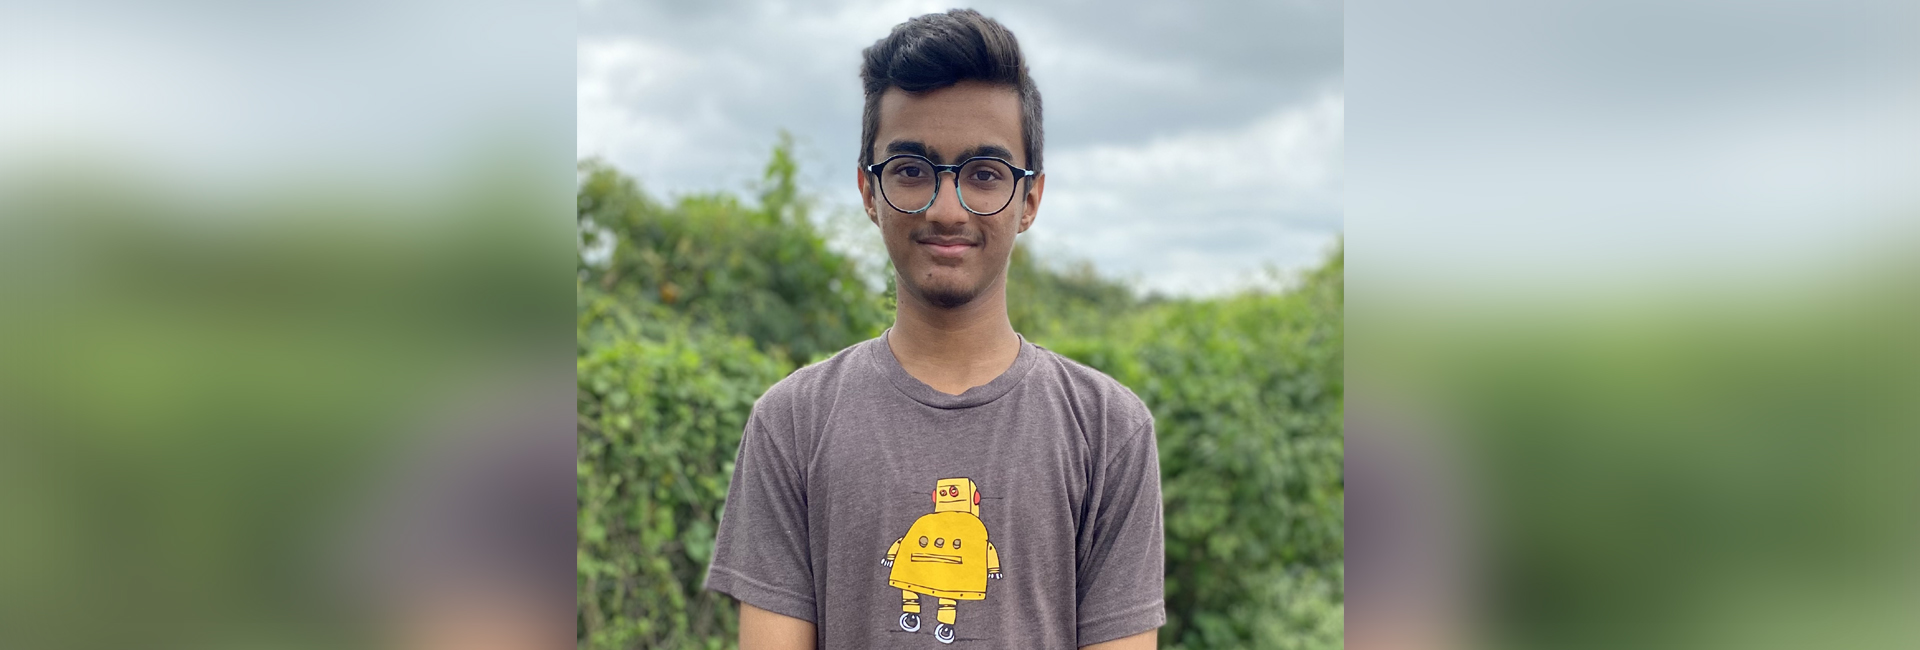 Innovator at 16: Aarav Garg’s app teaches youngsters about tech 